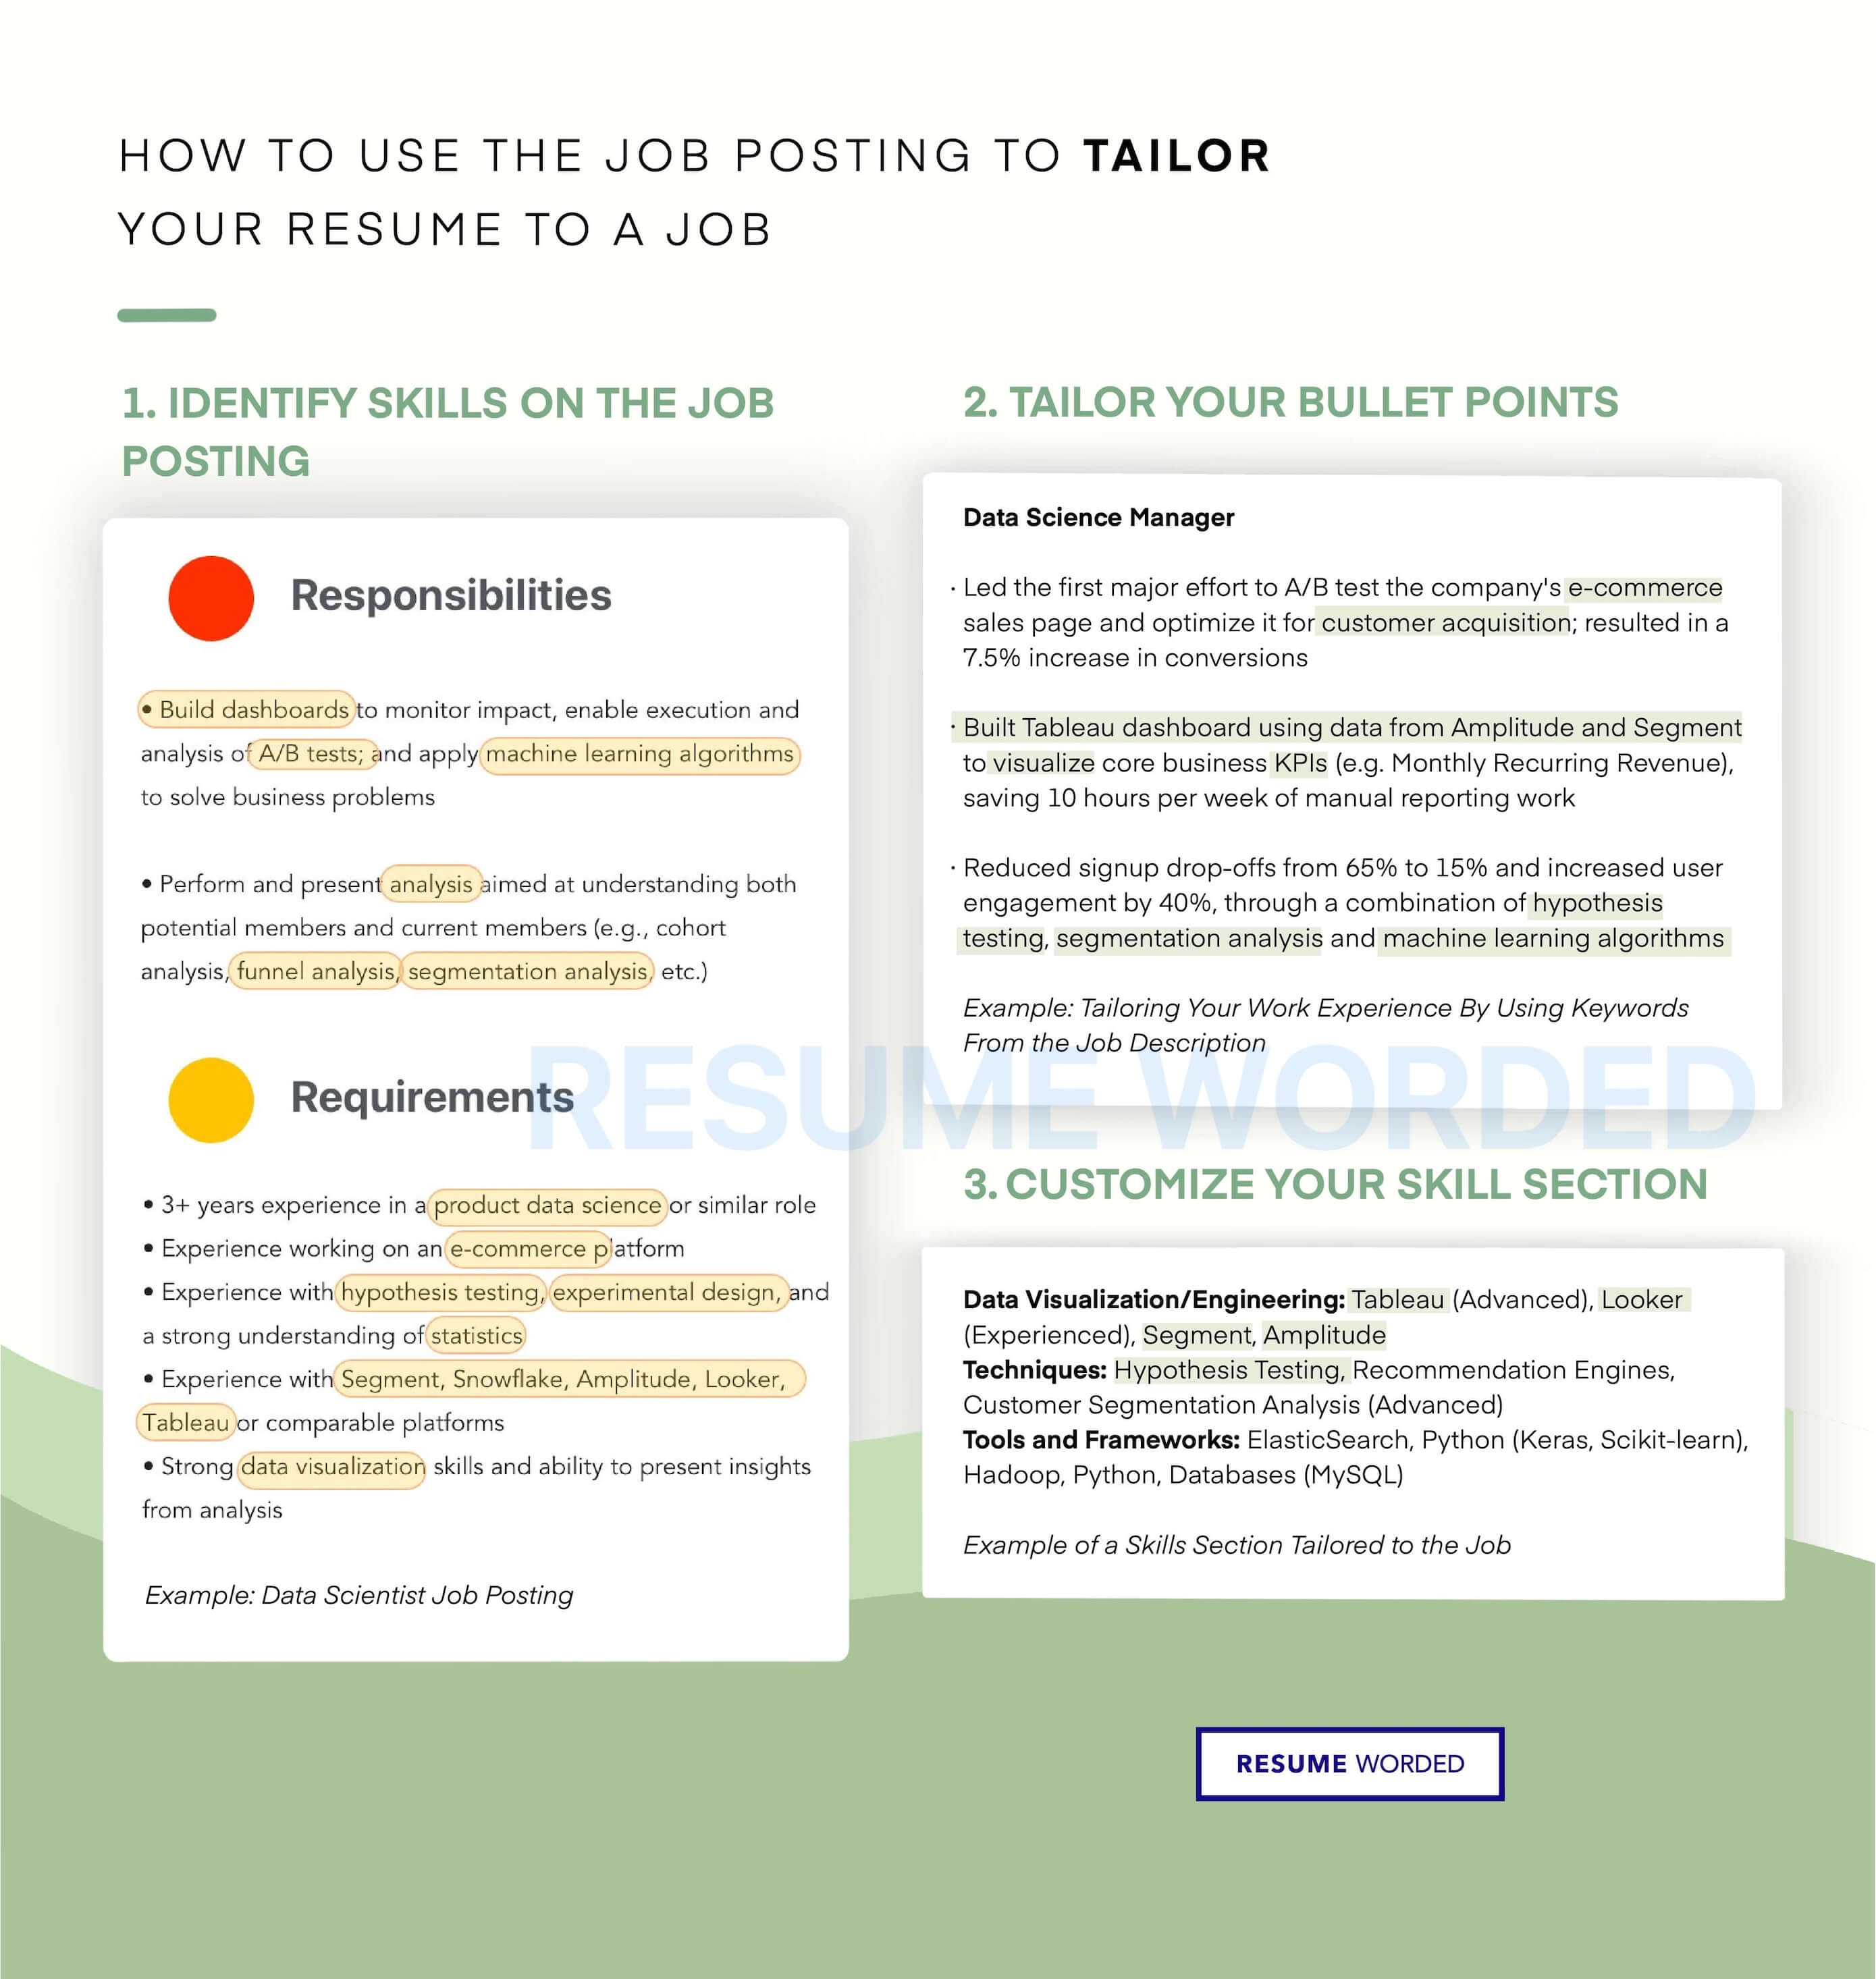 An infographic on how to tailor your resume to a job ad by identifying the right keywords and using them on your resume